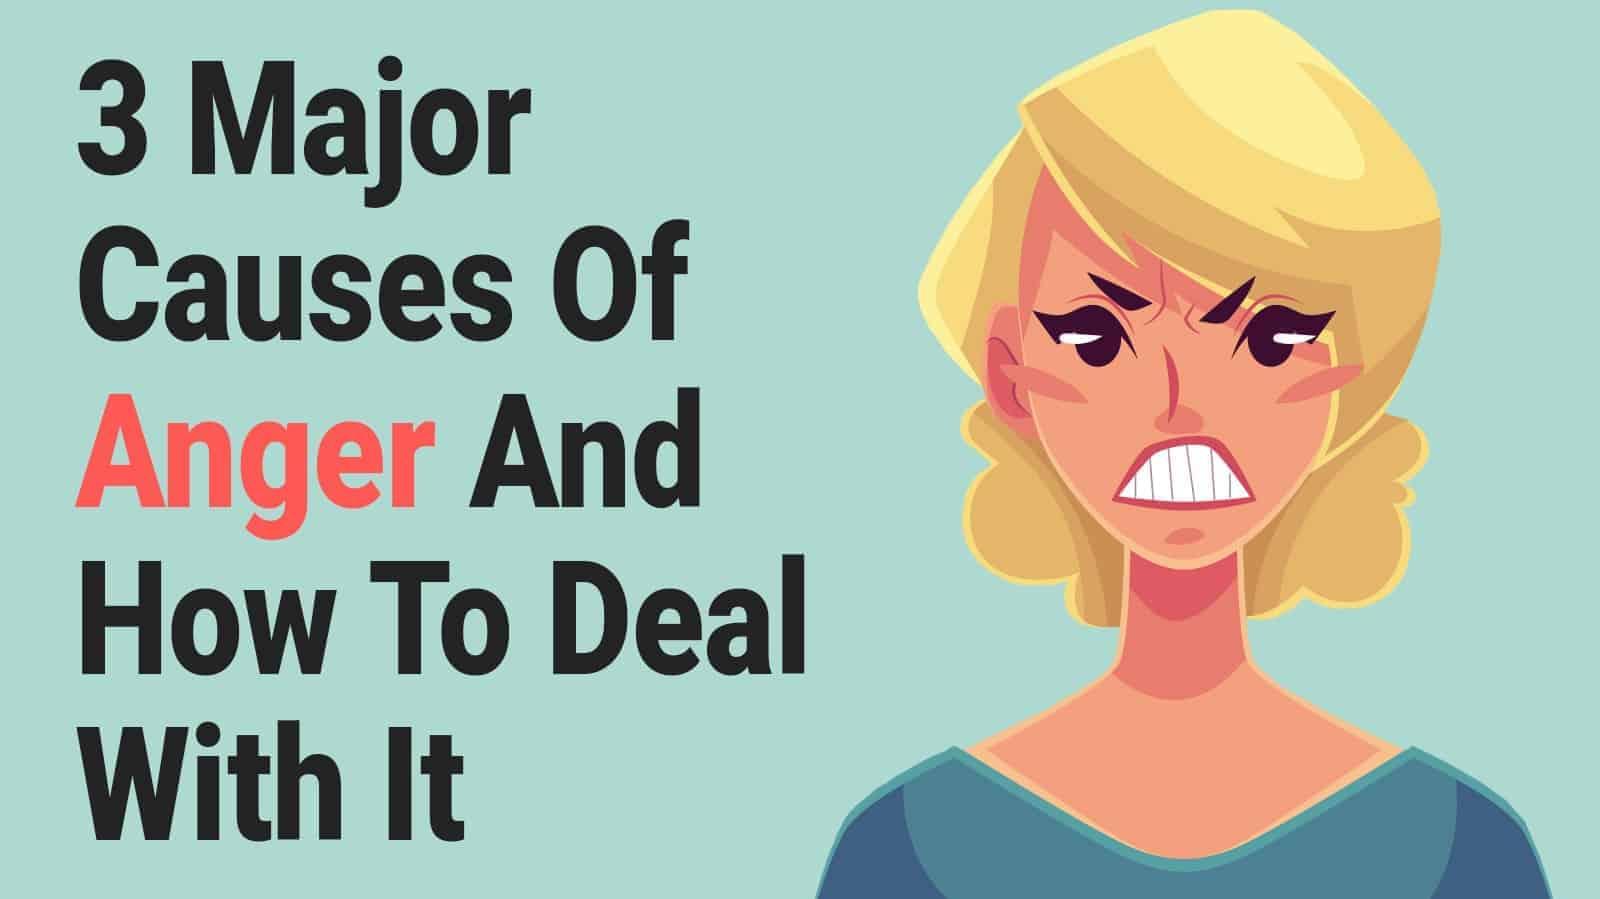 Major Causes Of Anger And How To Deal With It